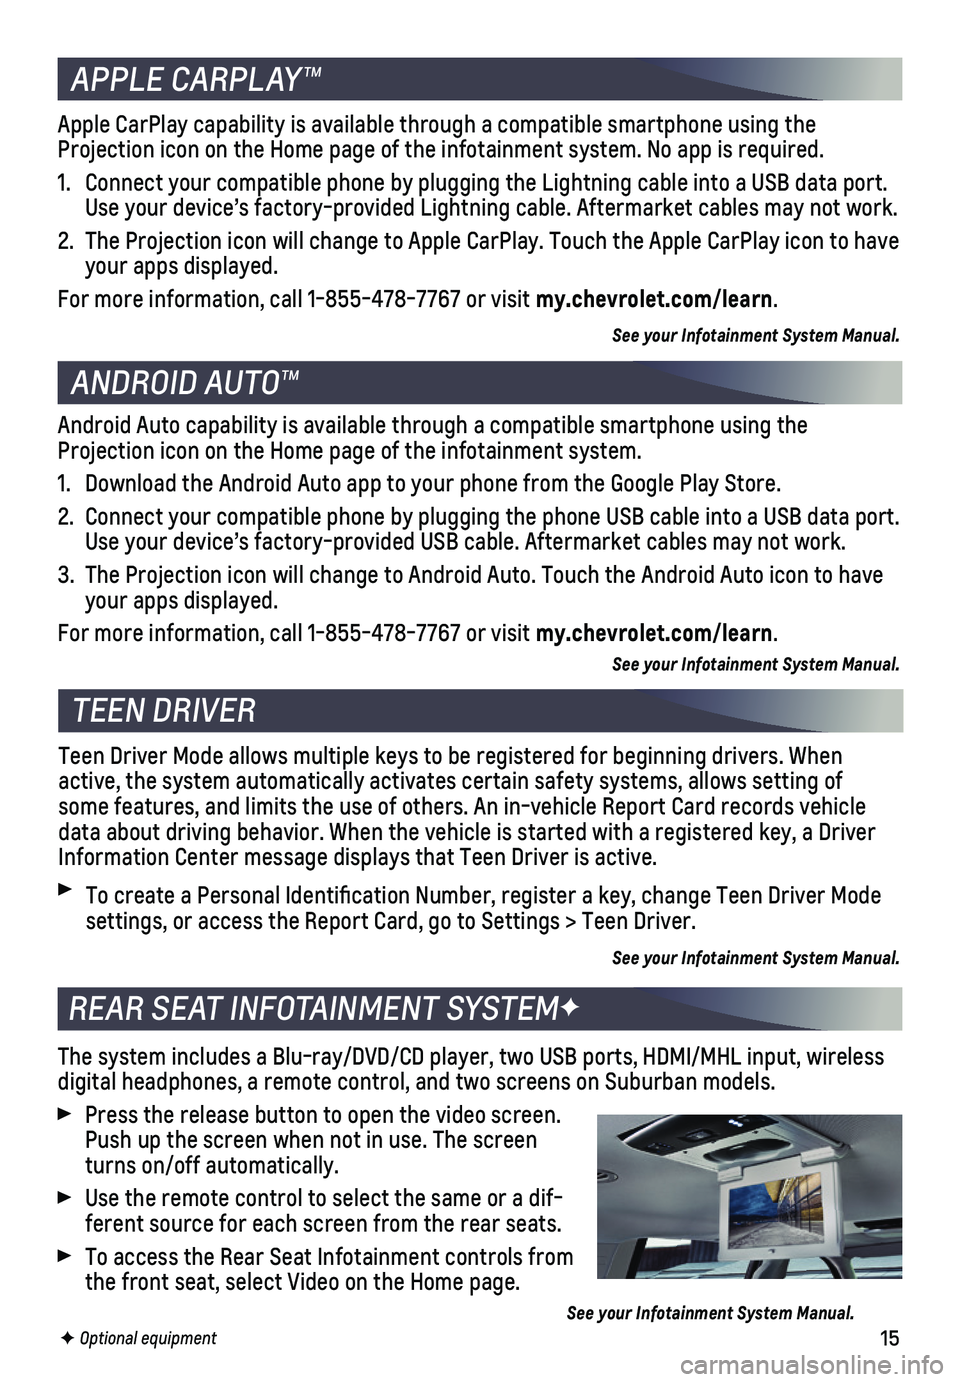 CHEVROLET SUBURBAN 2019  Get To Know Guide 15
The system includes a Blu-ray/DVD/CD player, two USB ports, HDMI/MHL inp\
ut, wireless digital headphones, a remote control, and two screens on Suburban models\
.
 Press the release button to open 